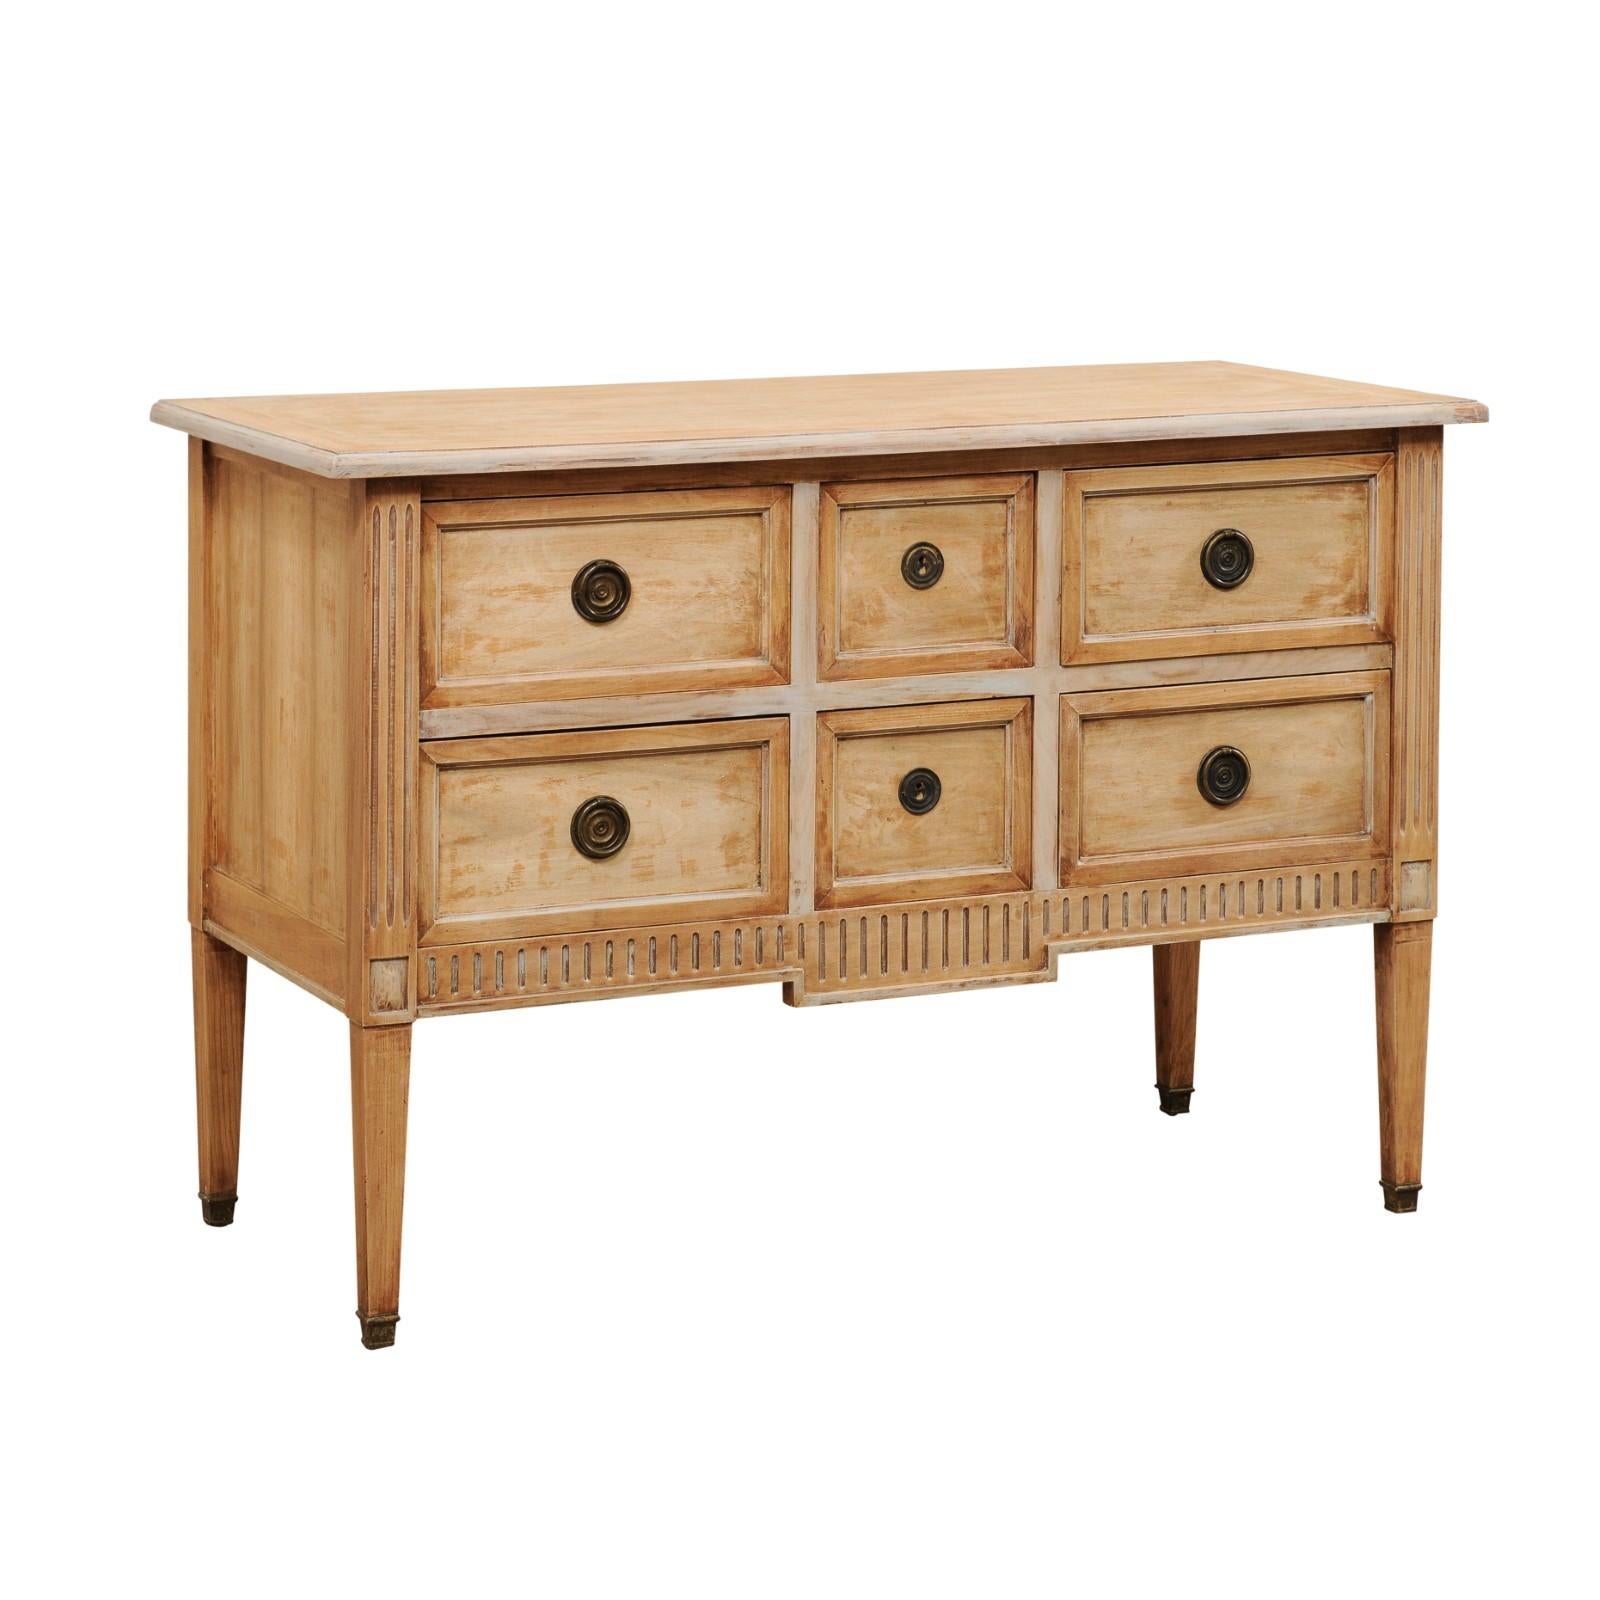 French Six-Drawer Carved Pale Wood Chest from the Mid-20th Century